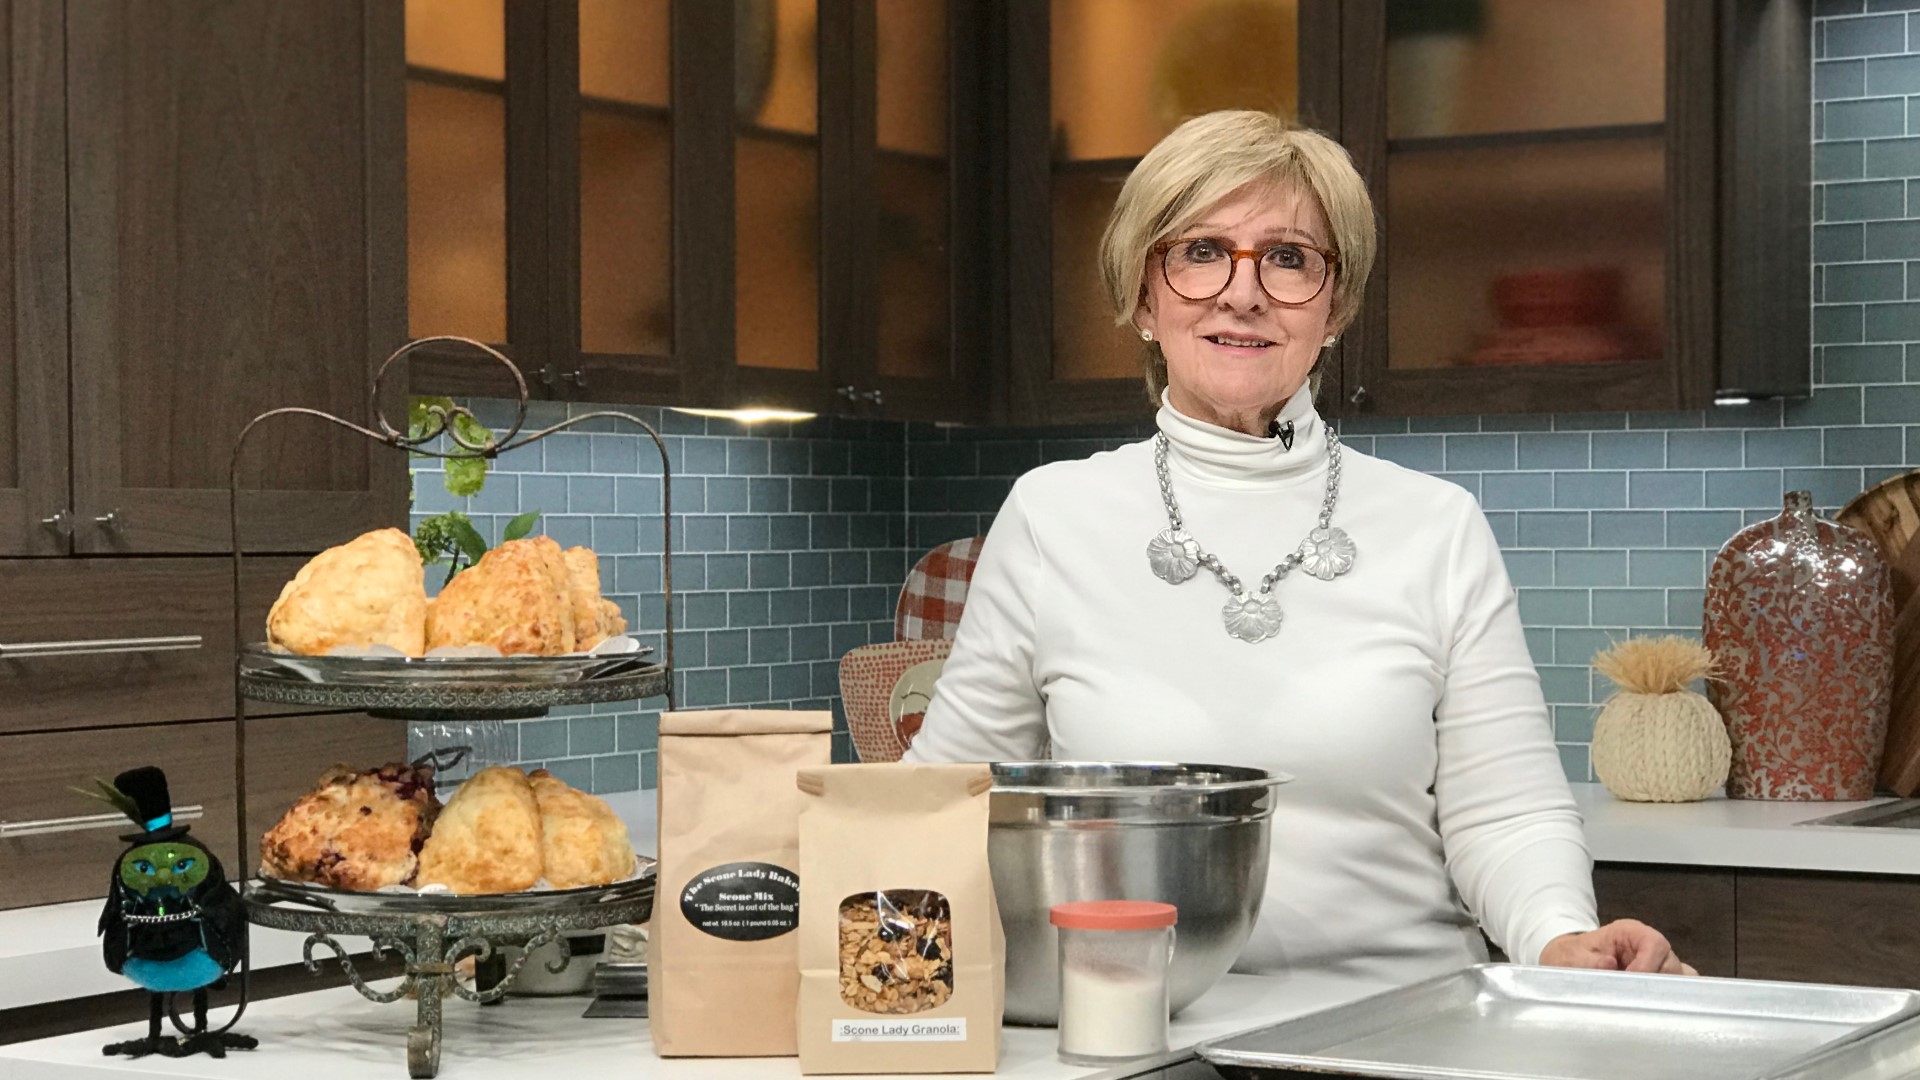 Christie Eichler, of La Conner's Scone Lady Bakery, shares her recipe, technique, and tips for baking the perfect scones.